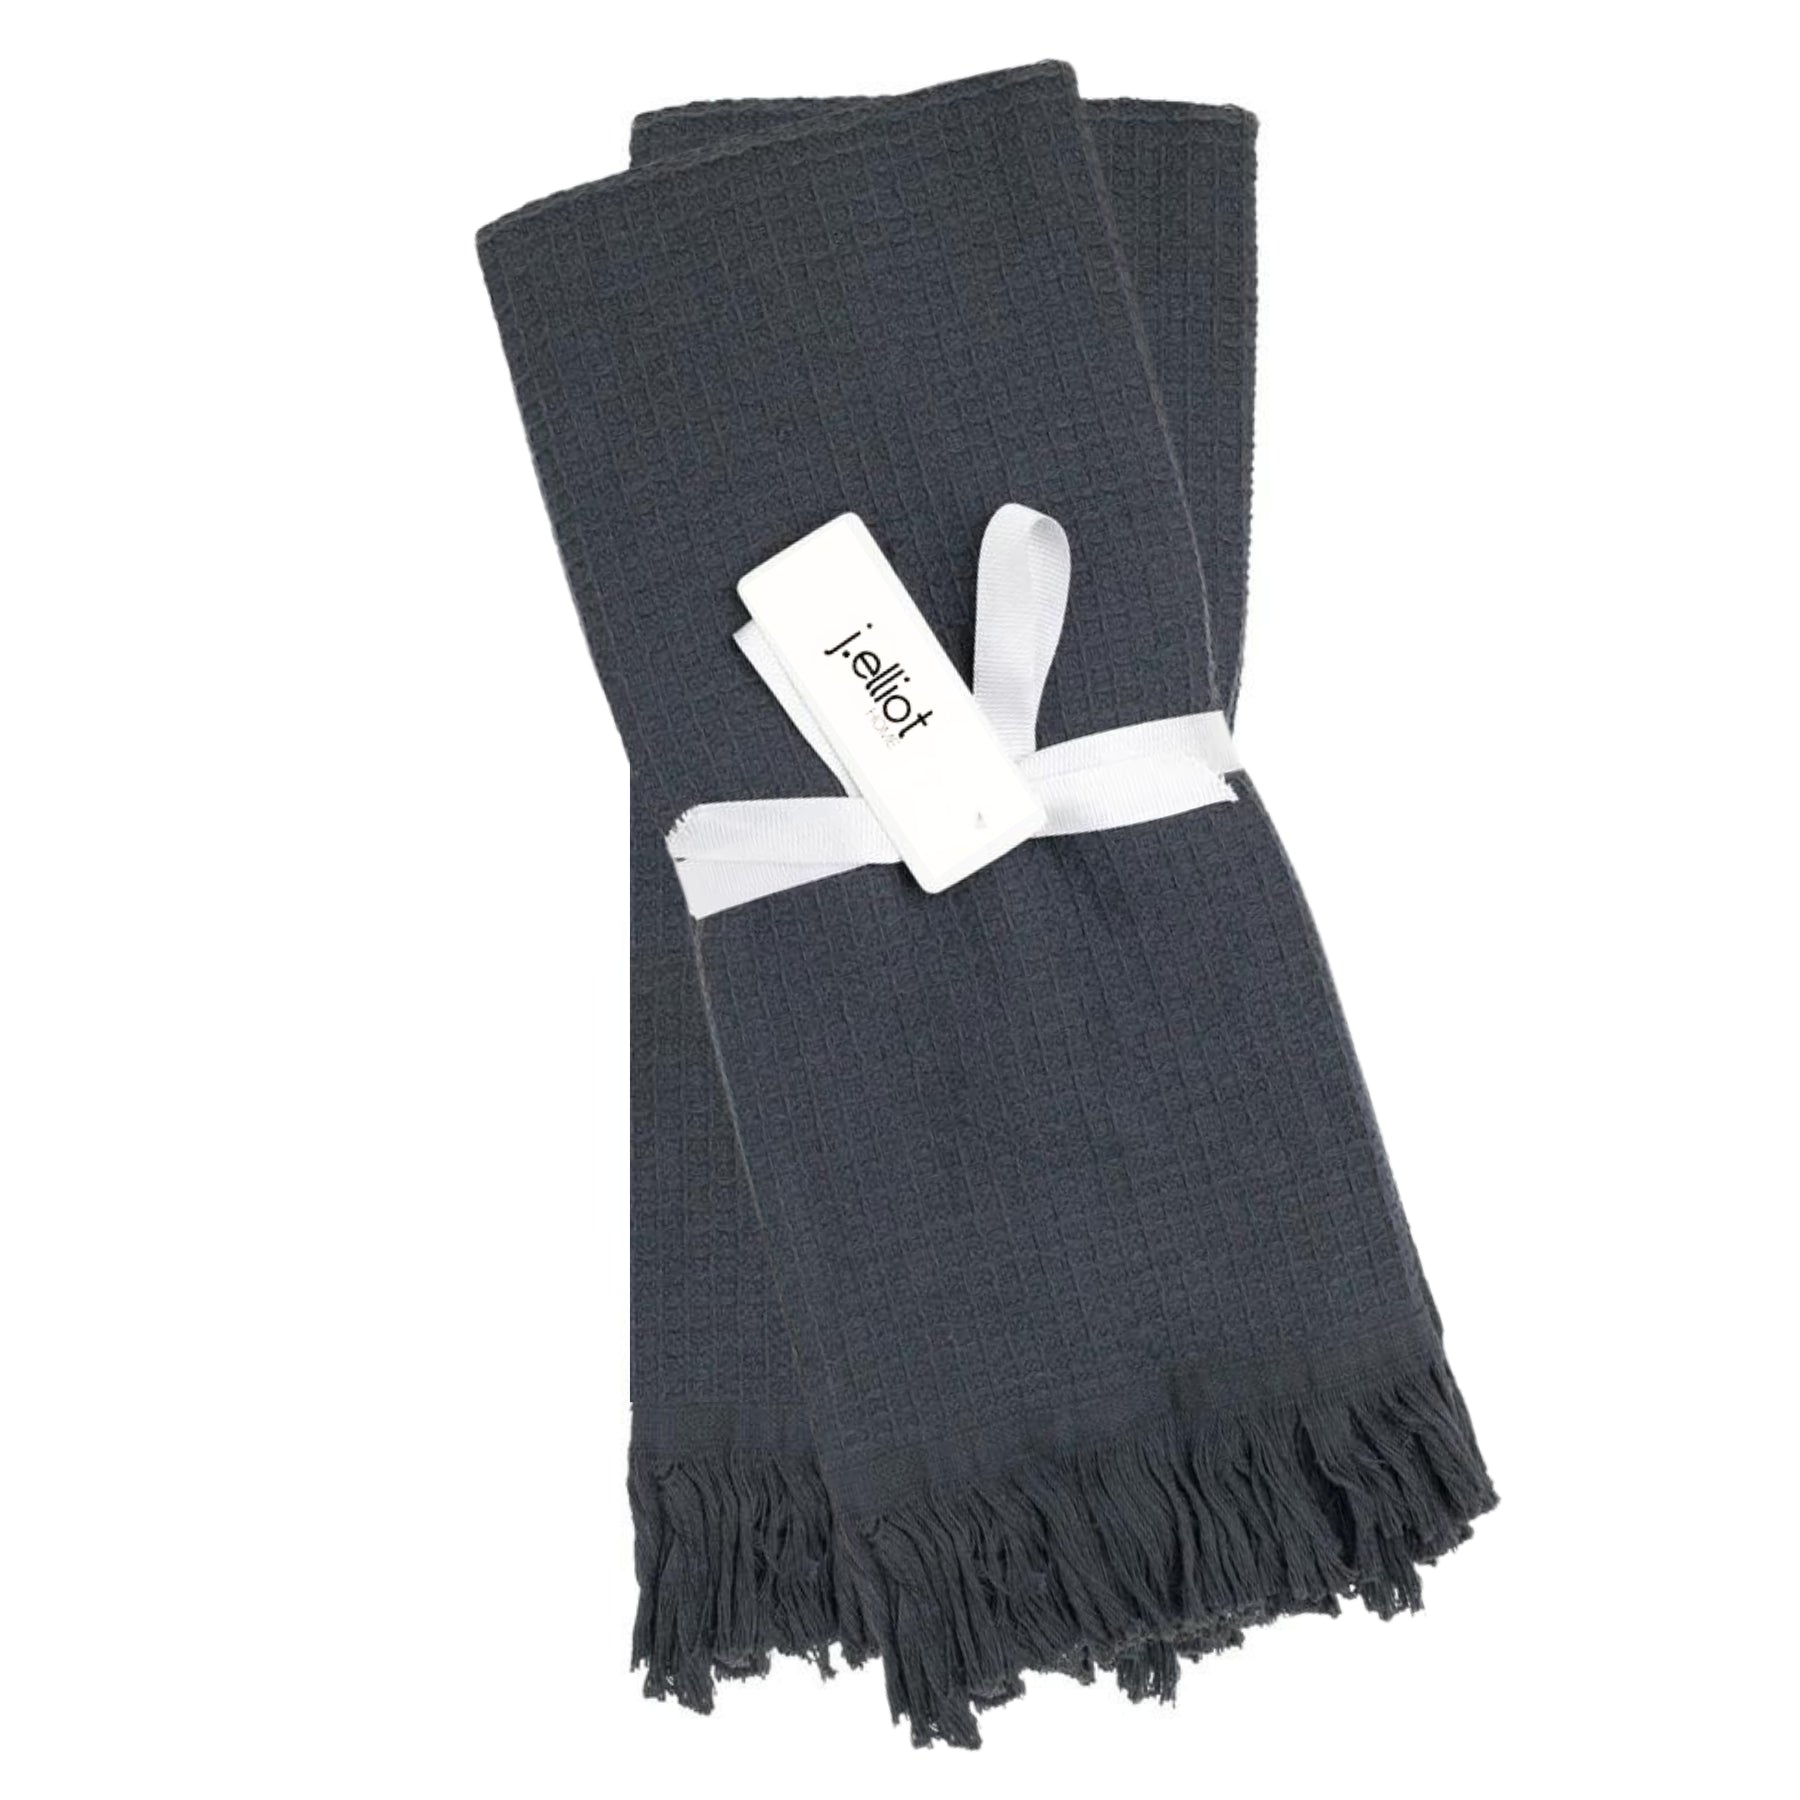 The Camila Cotton Waffle Hand Towels in Coal feature a modern waffle weave and practical fringe detailing